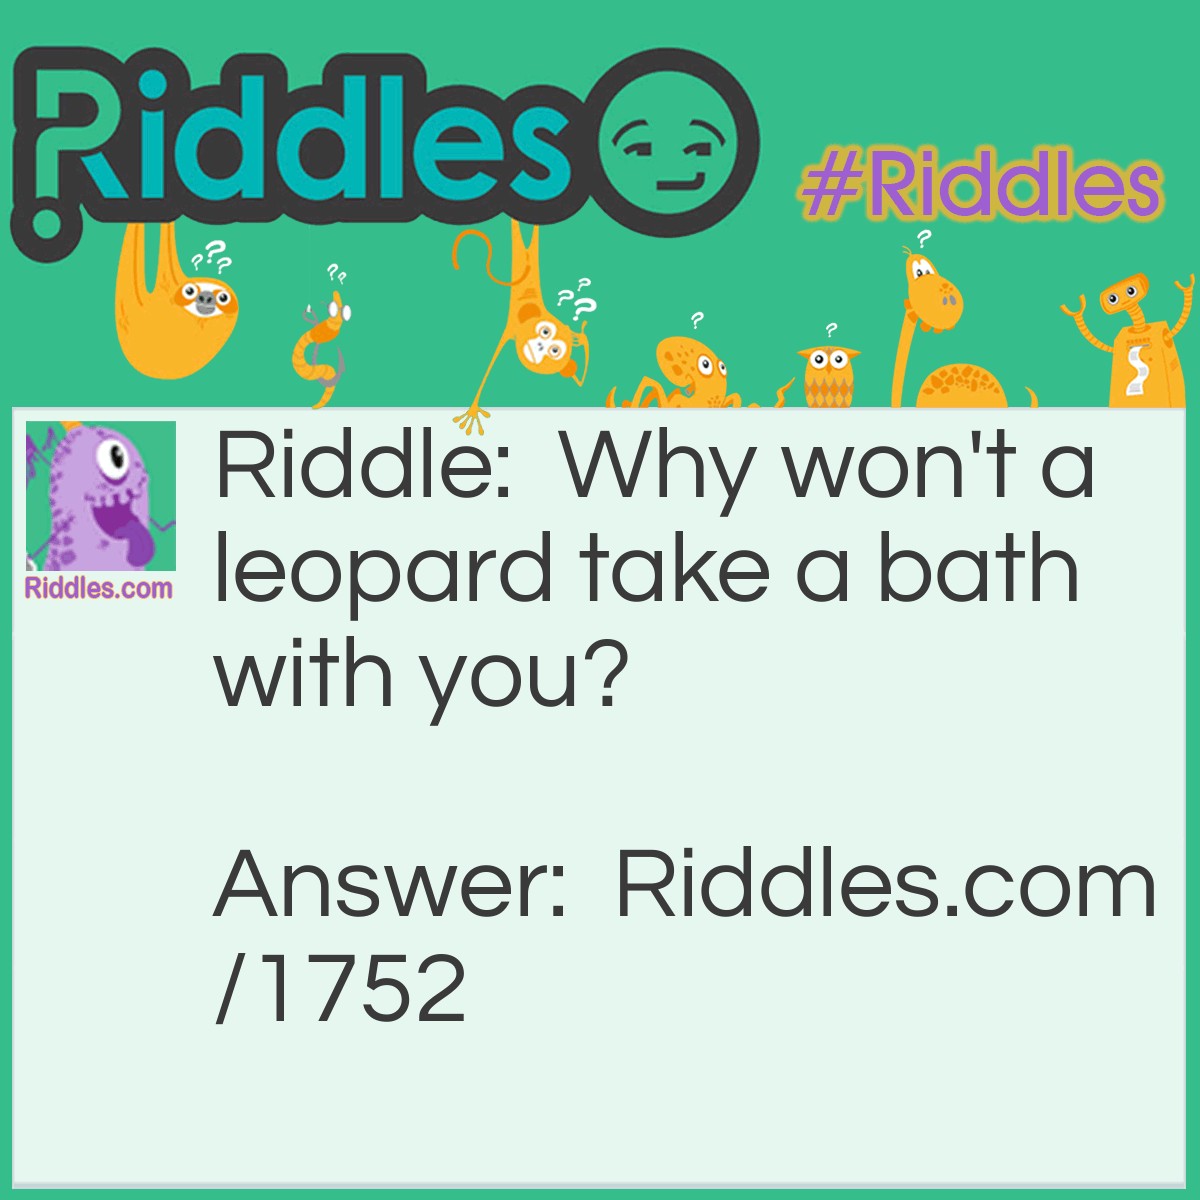 Riddle: Why won't a leopard take a bath with you? Answer: It doesn't want to come out spotless.